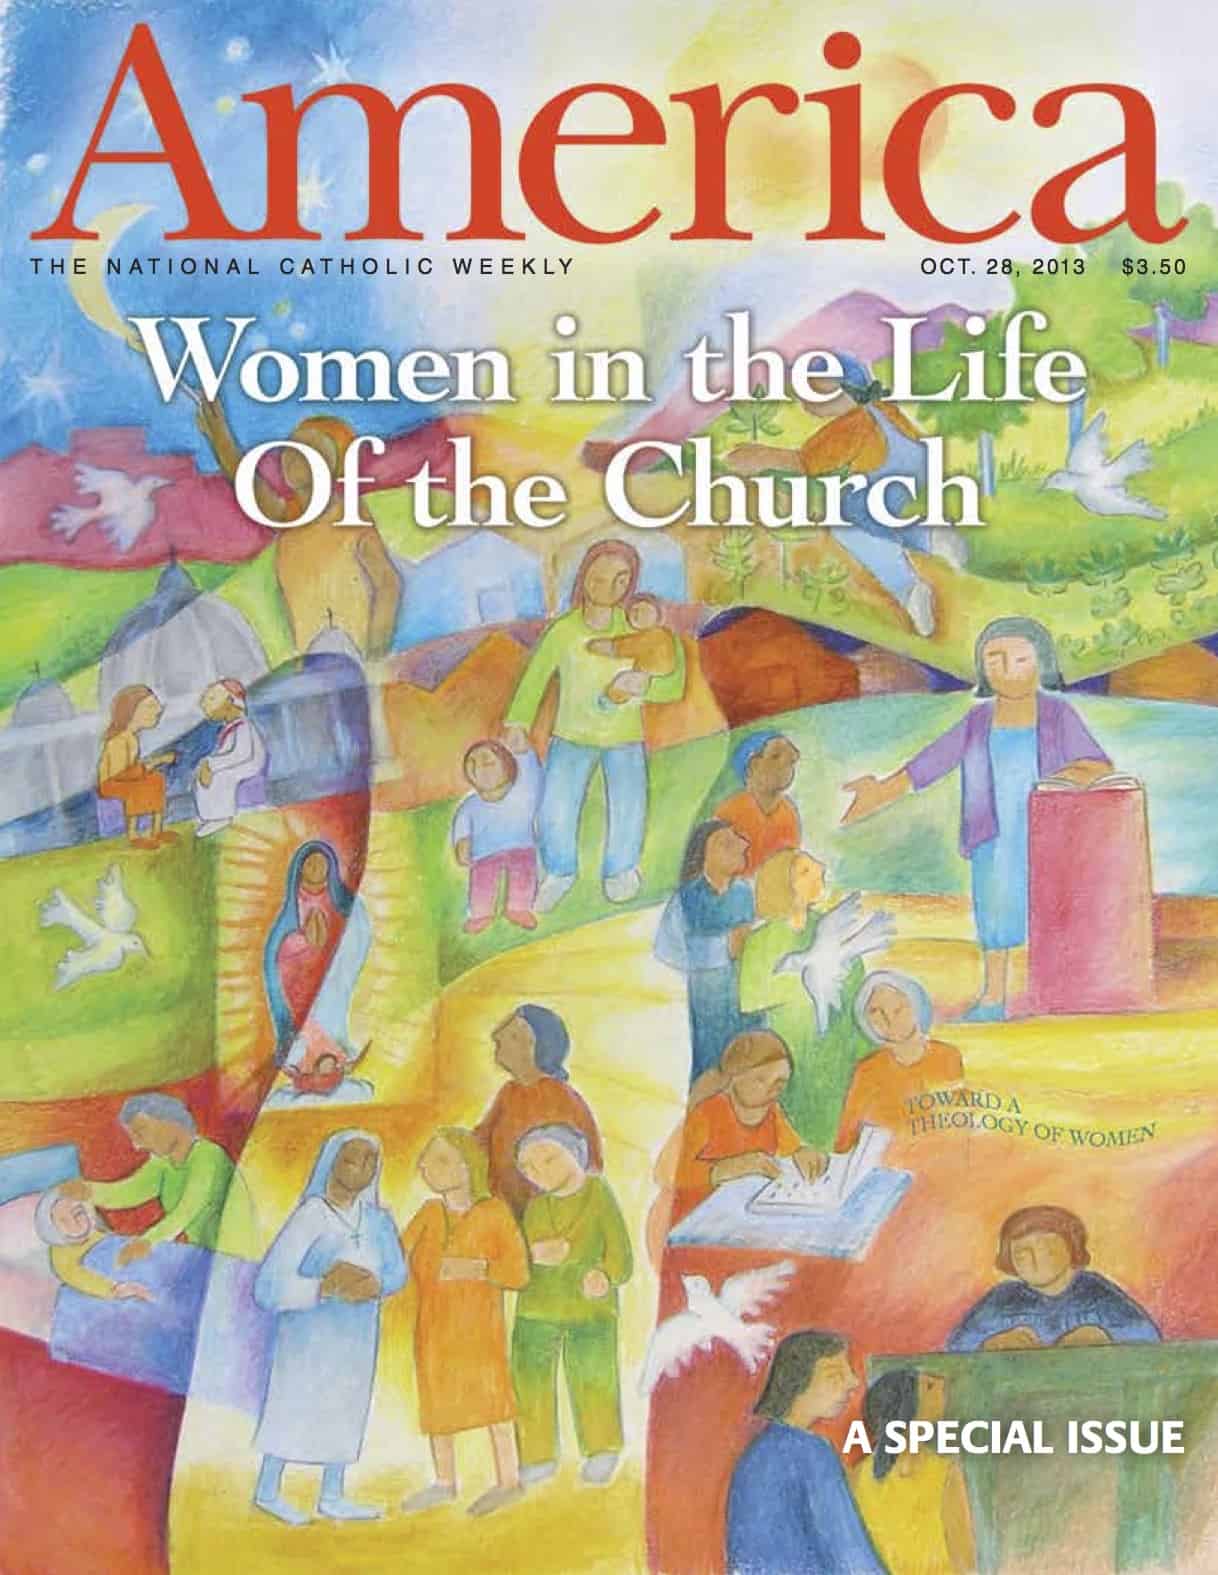 Worth Reading: America Magazine on Women in the Life of the Church